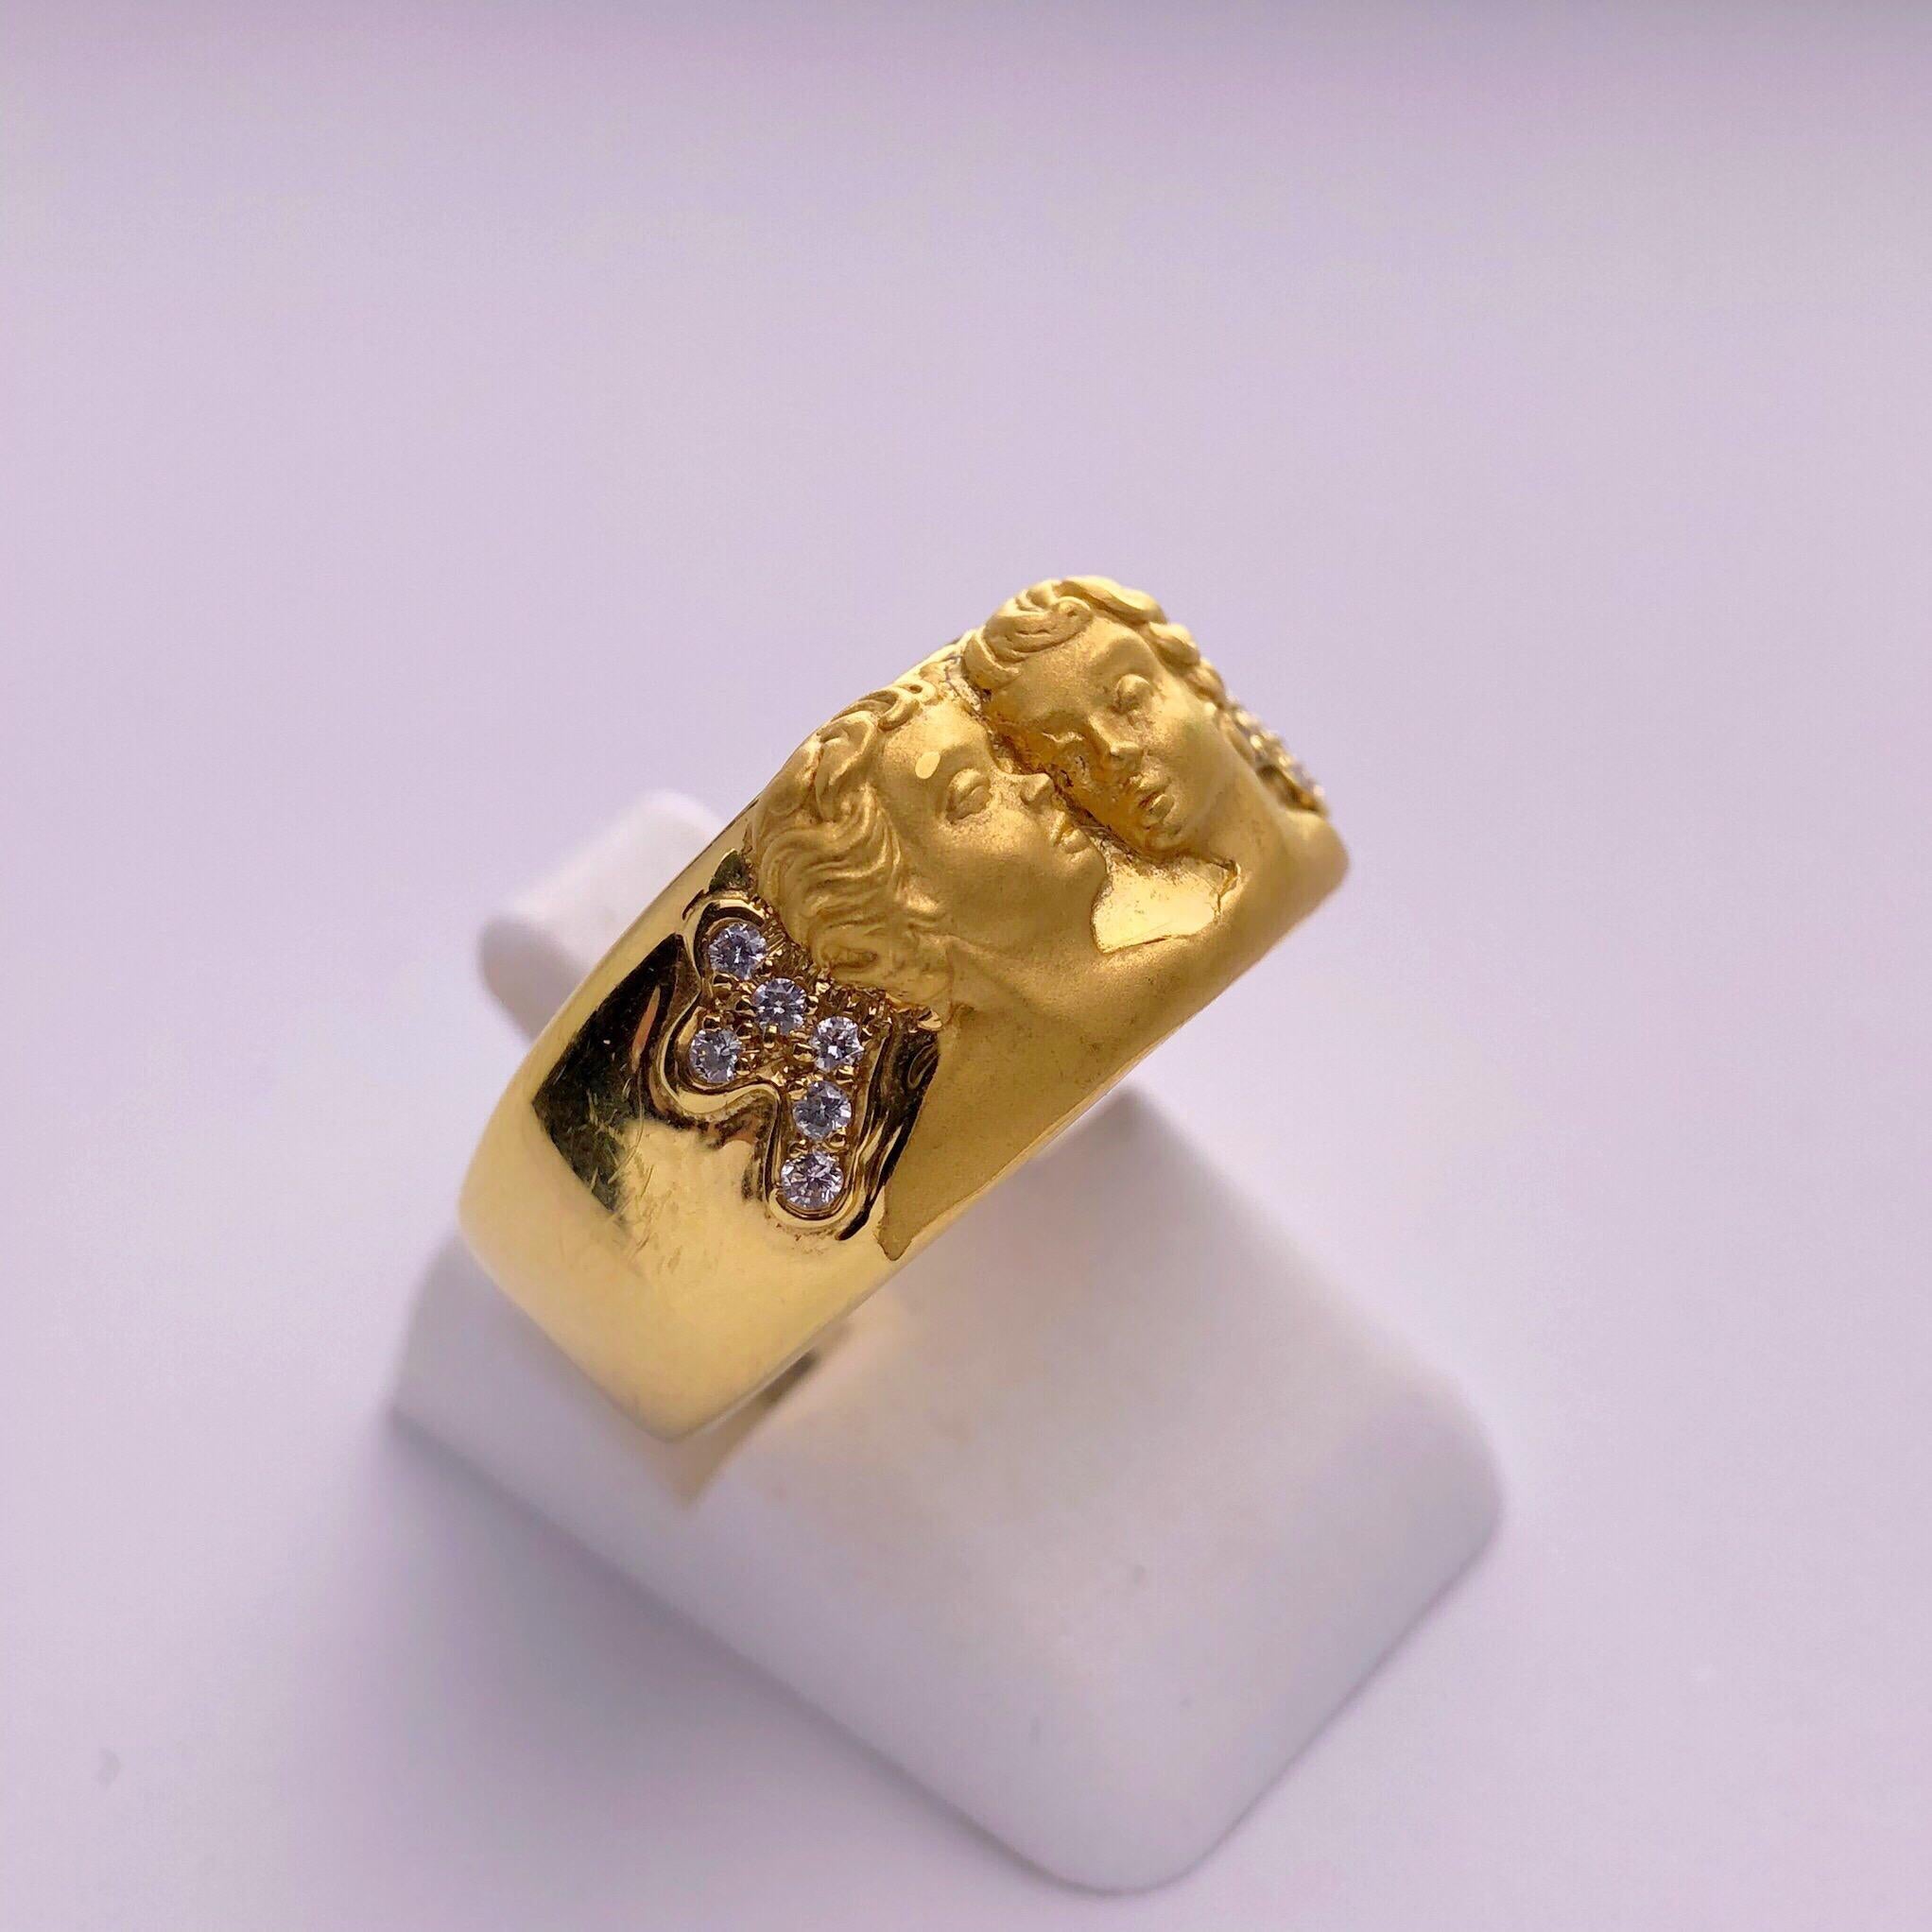 Carrera Y Carrera has built its its famous name on figurative designs, an obsession with surface finishes, and a compelling way of seeing beauty in art and nature. This 18 karat yellow gold ring is a perfect example of Carrera's iconic designs. The